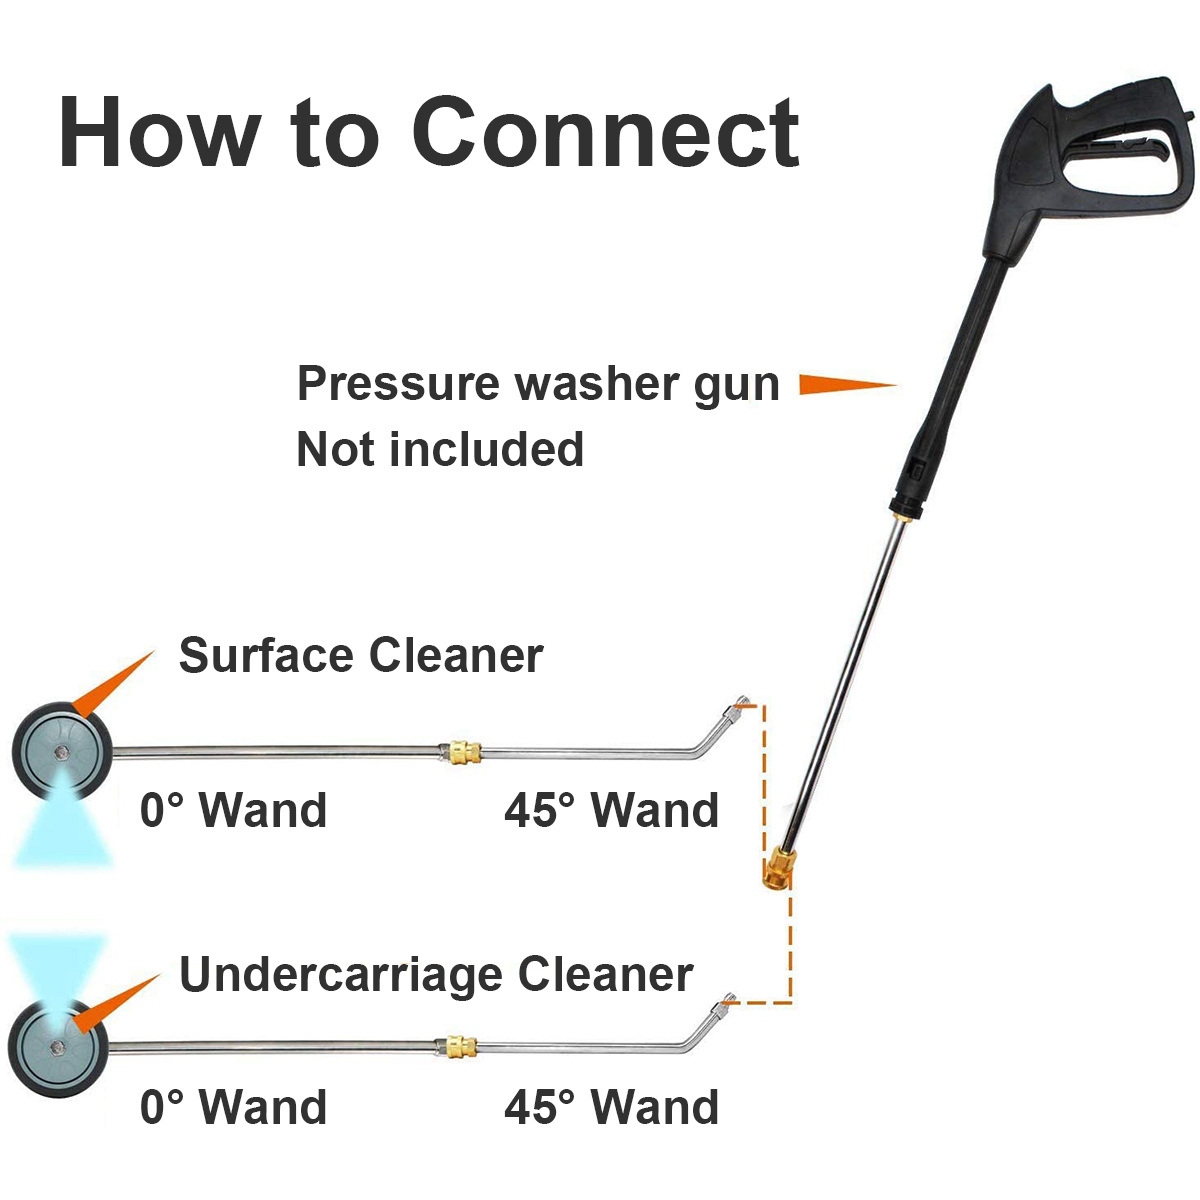 2-IN-1-Pressure-Washer-Undercarriage-Cleaner-4000PSI-Underbody-Car-Wash-Broom-US-1936837-8